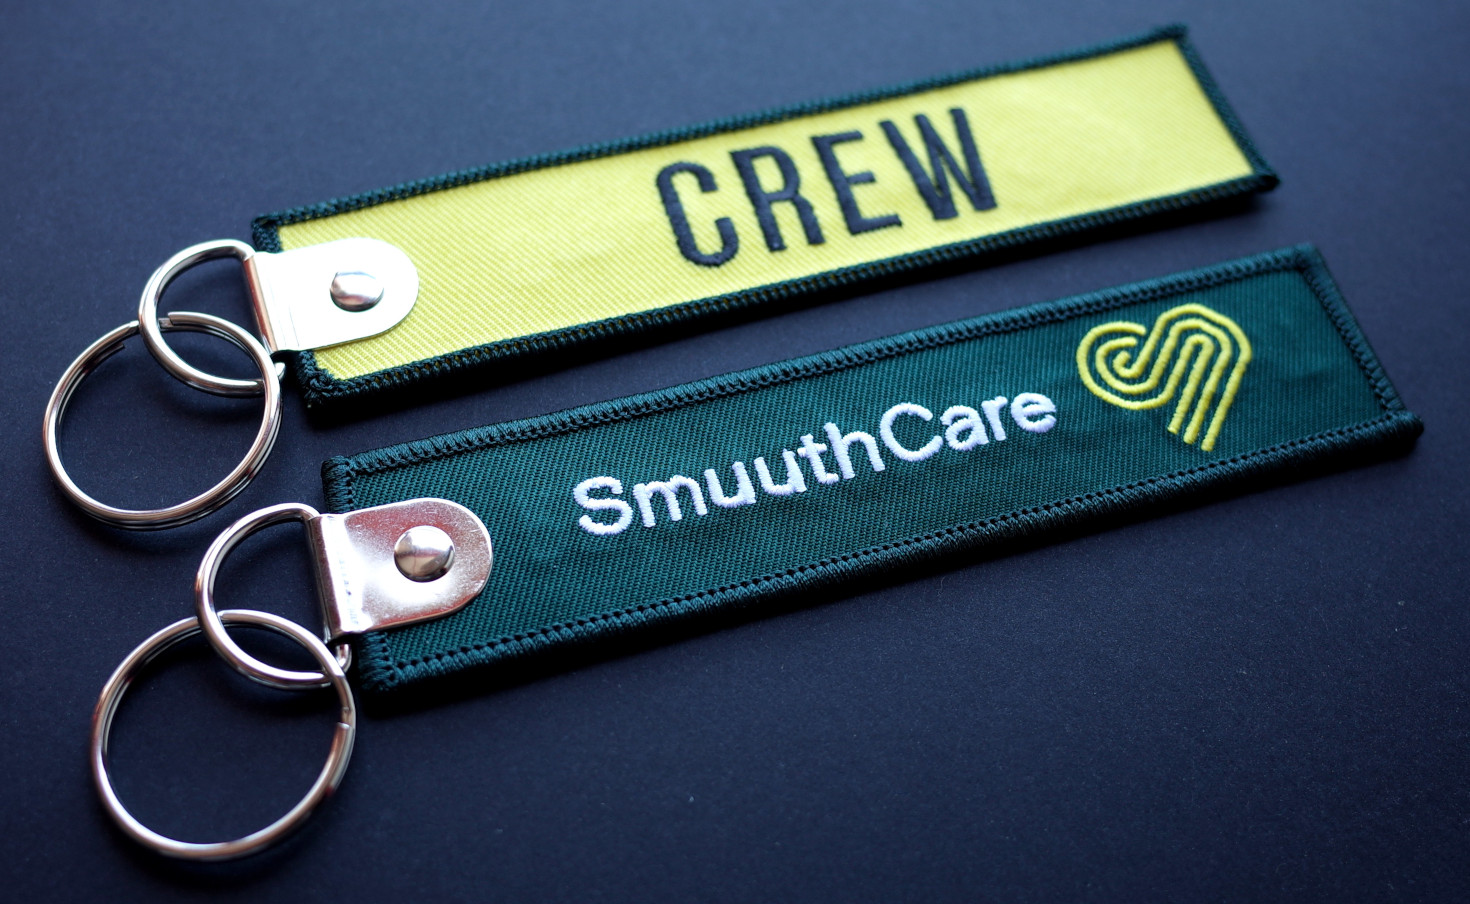 SmuuthCare CREW reinforced embroidered tag